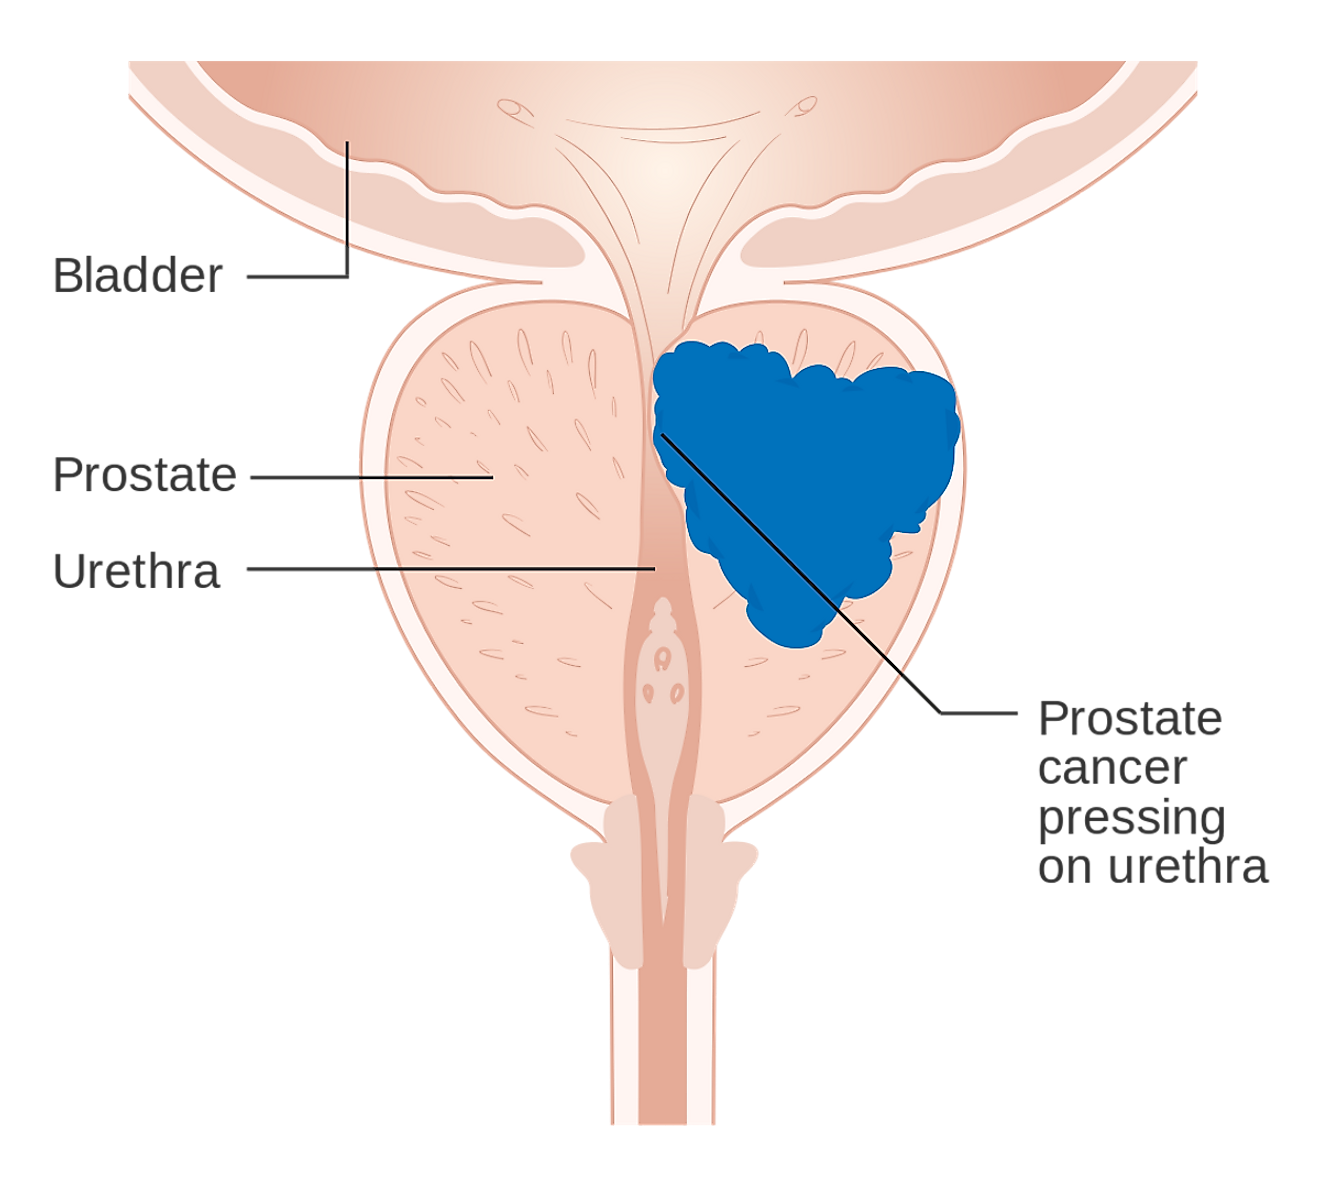 A diagram of prostate cancer pressing on the urethra, which can cause symptoms. Image credit: Cancer Research UK/Wikimedia.org